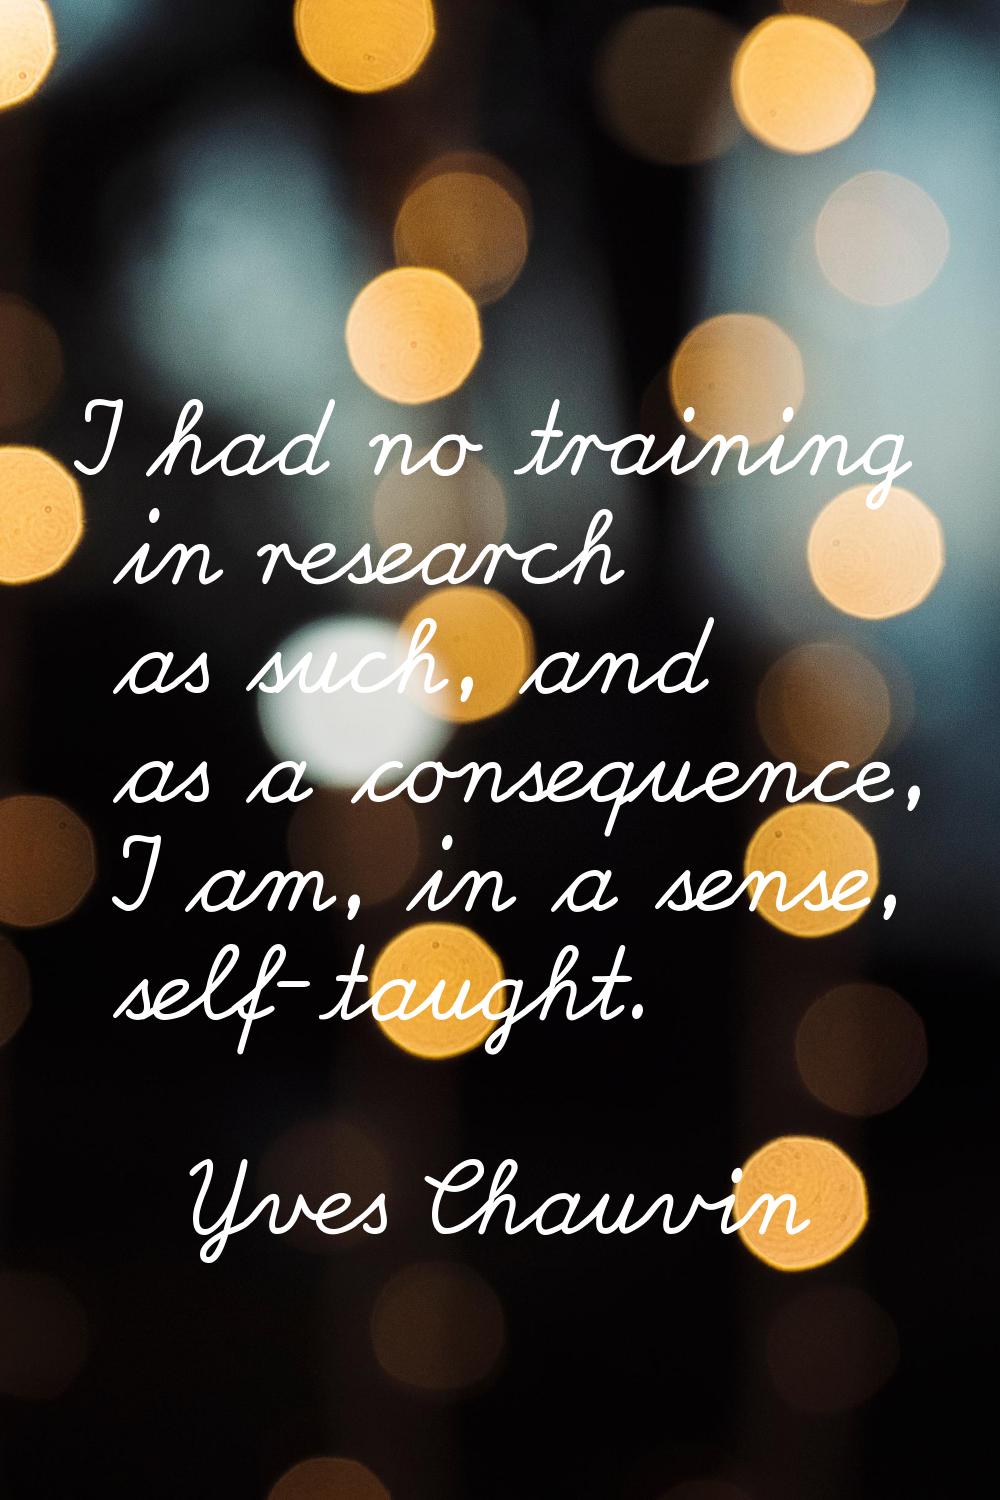 I had no training in research as such, and as a consequence, I am, in a sense, self-taught.